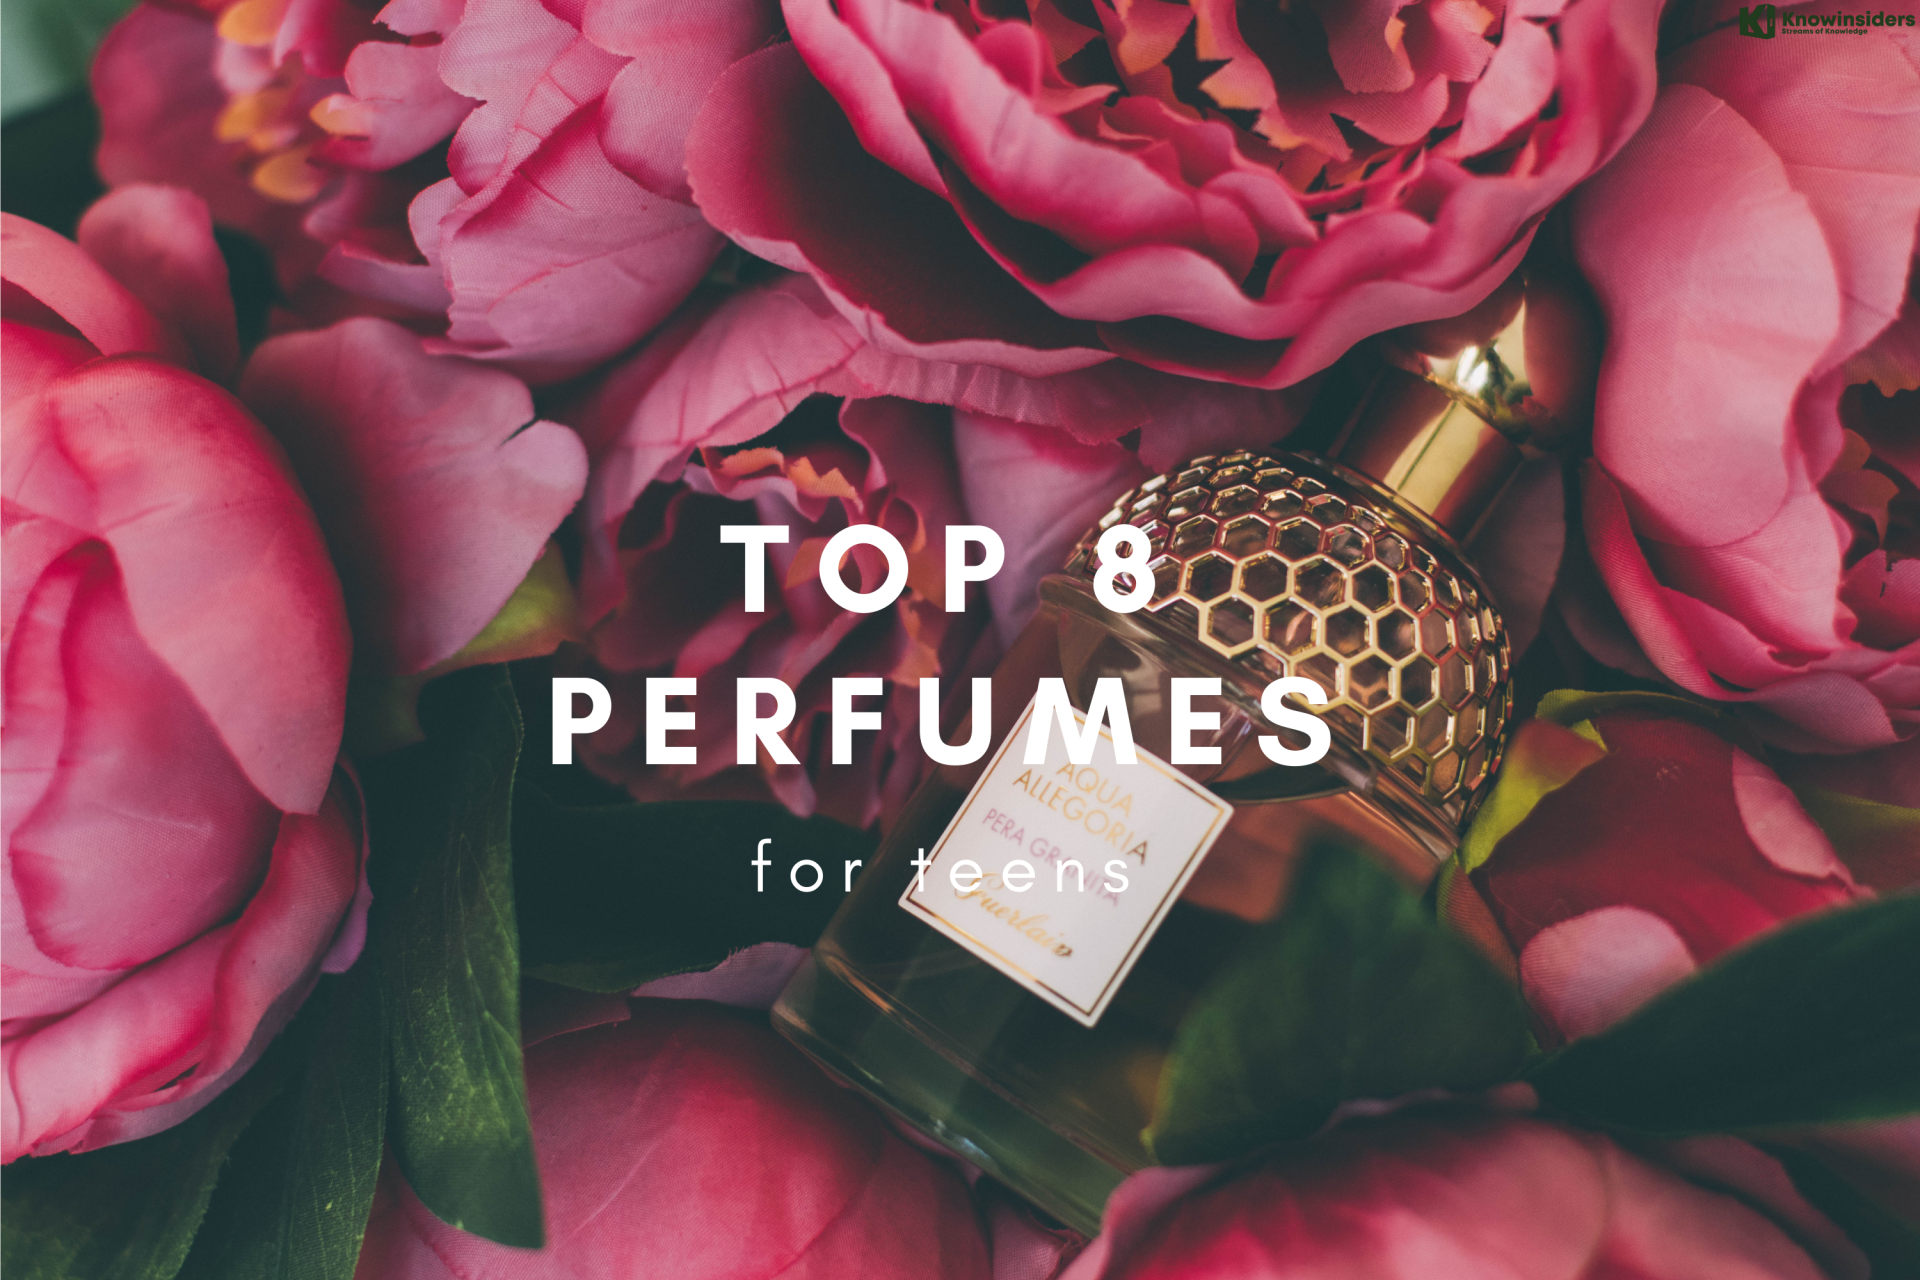 Top 8 Perfumes for Teens